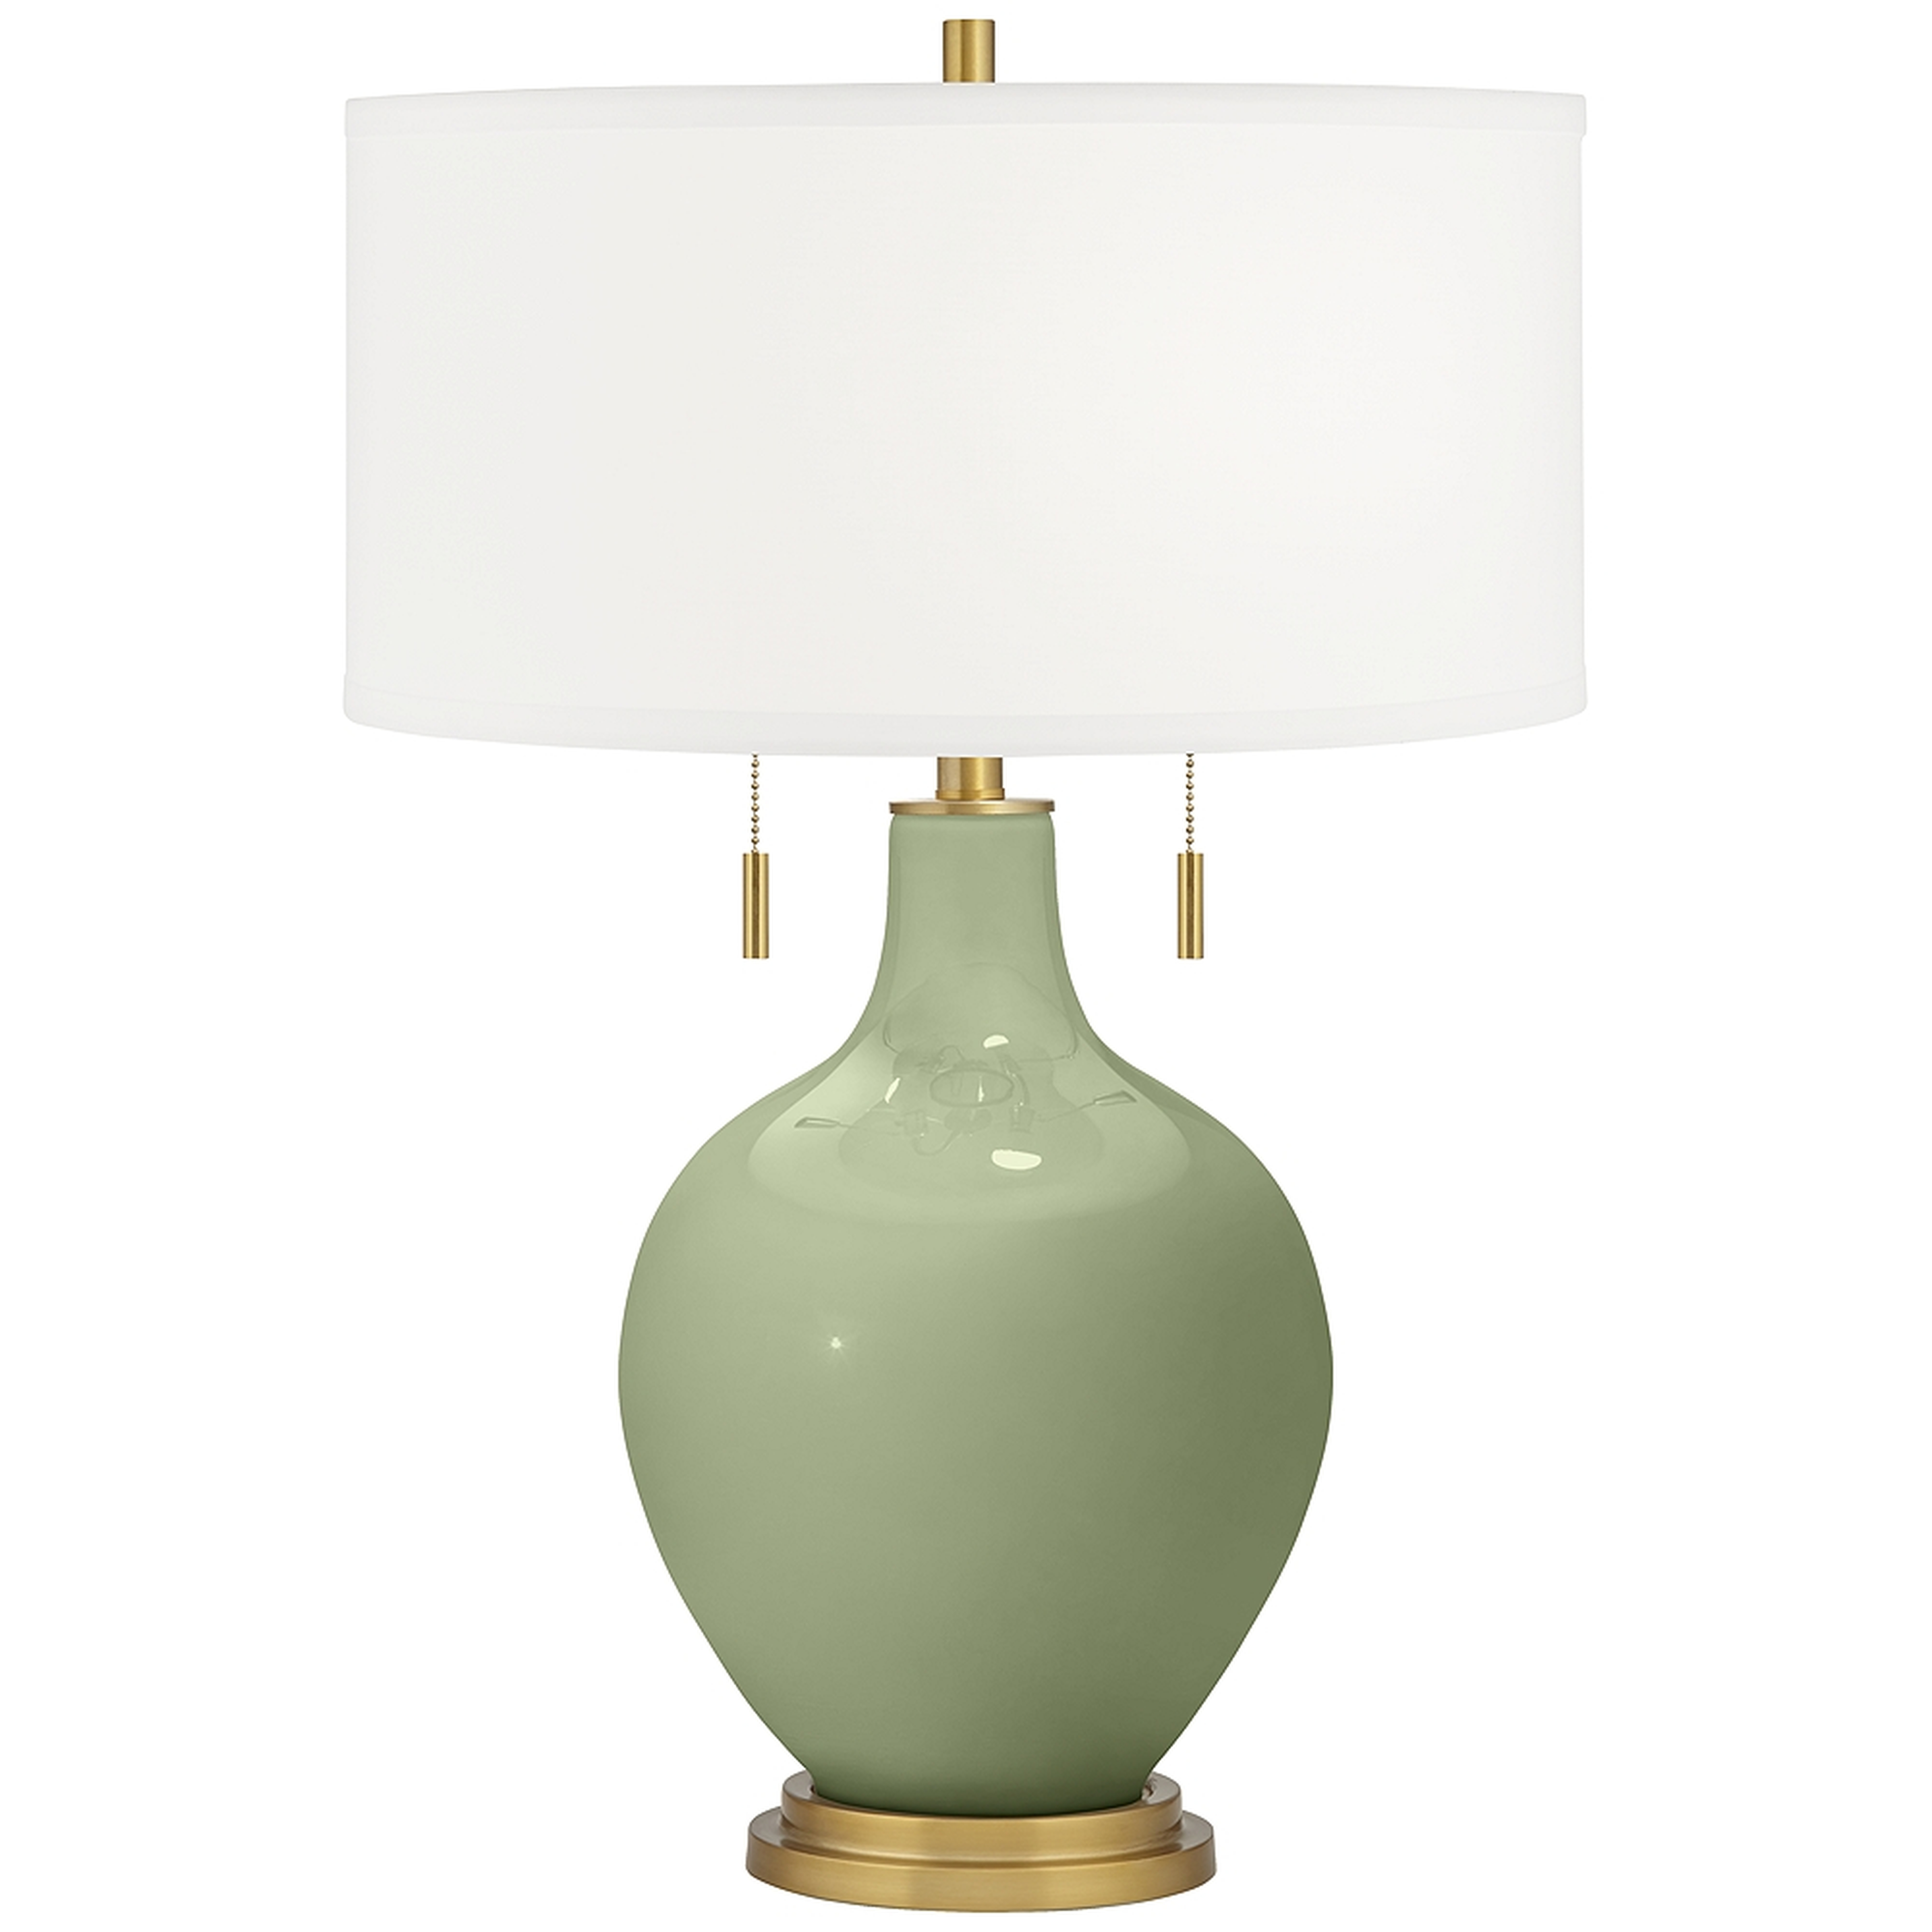 Majolica Green Toby Brass Accents Table Lamp - Style # 95P30 - Lamps Plus